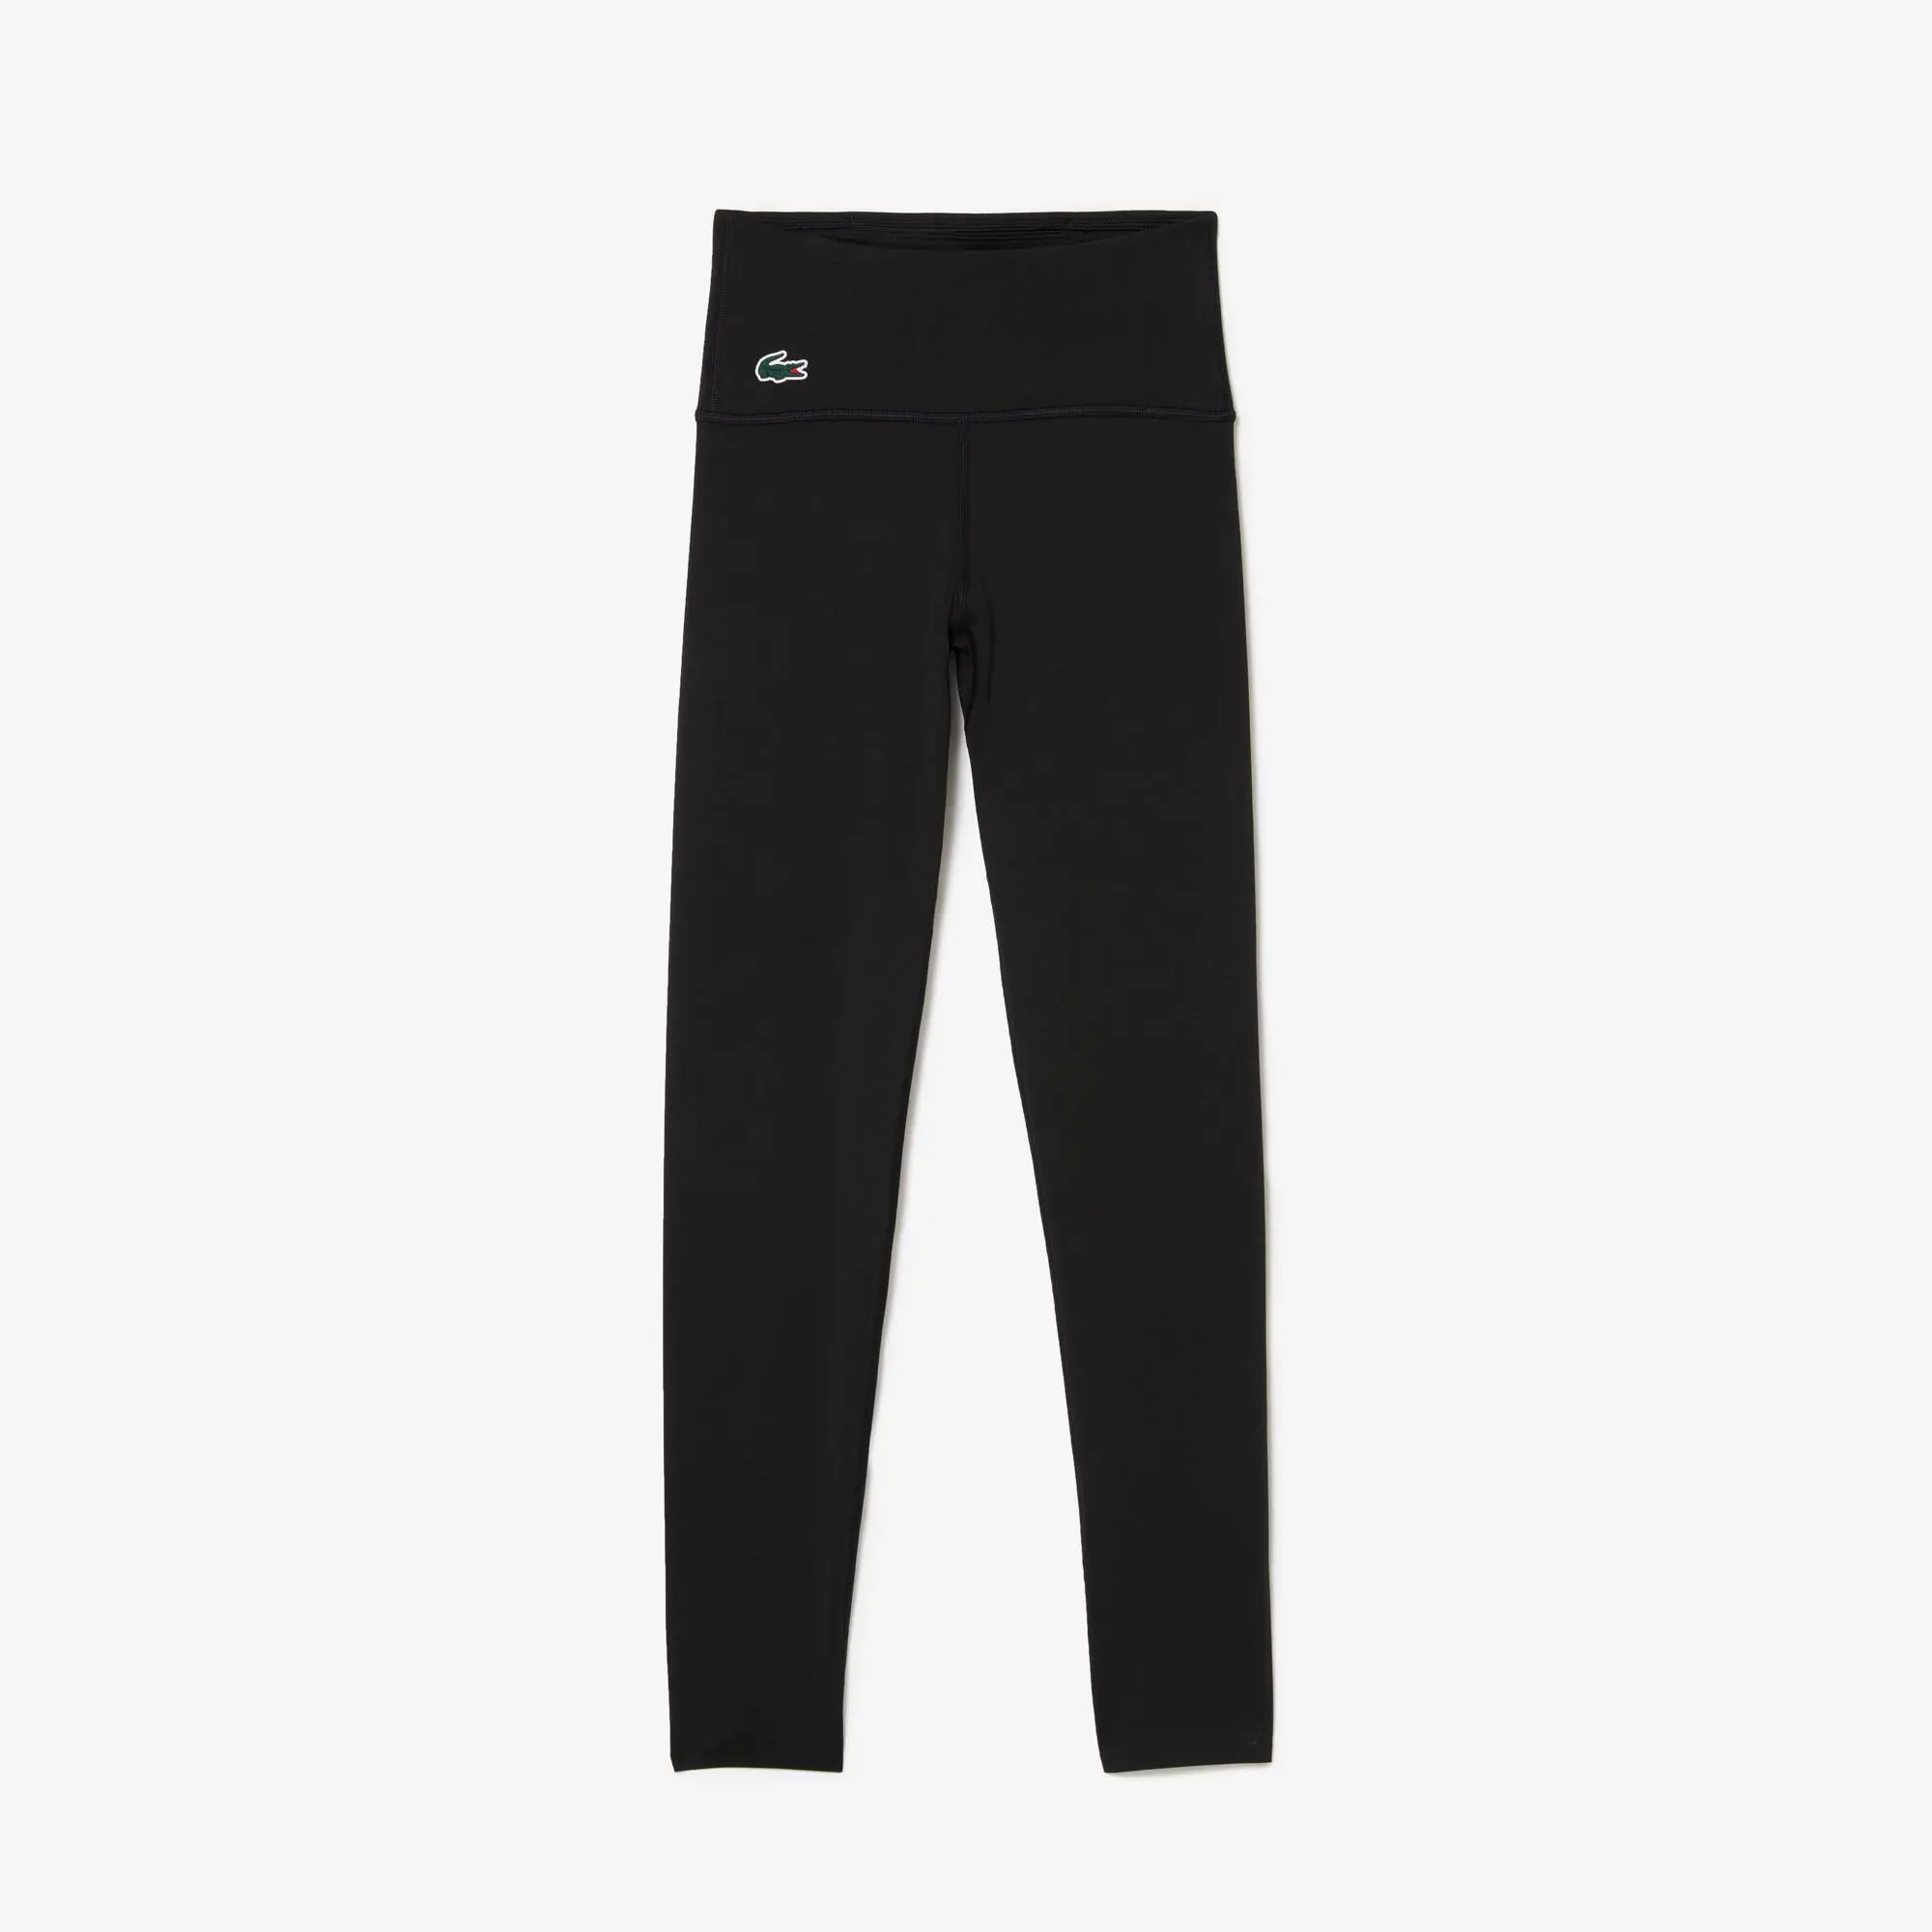 Lacoste Women’s Lacoste Sport Recycled Polyester Sculpting Leggings. 2